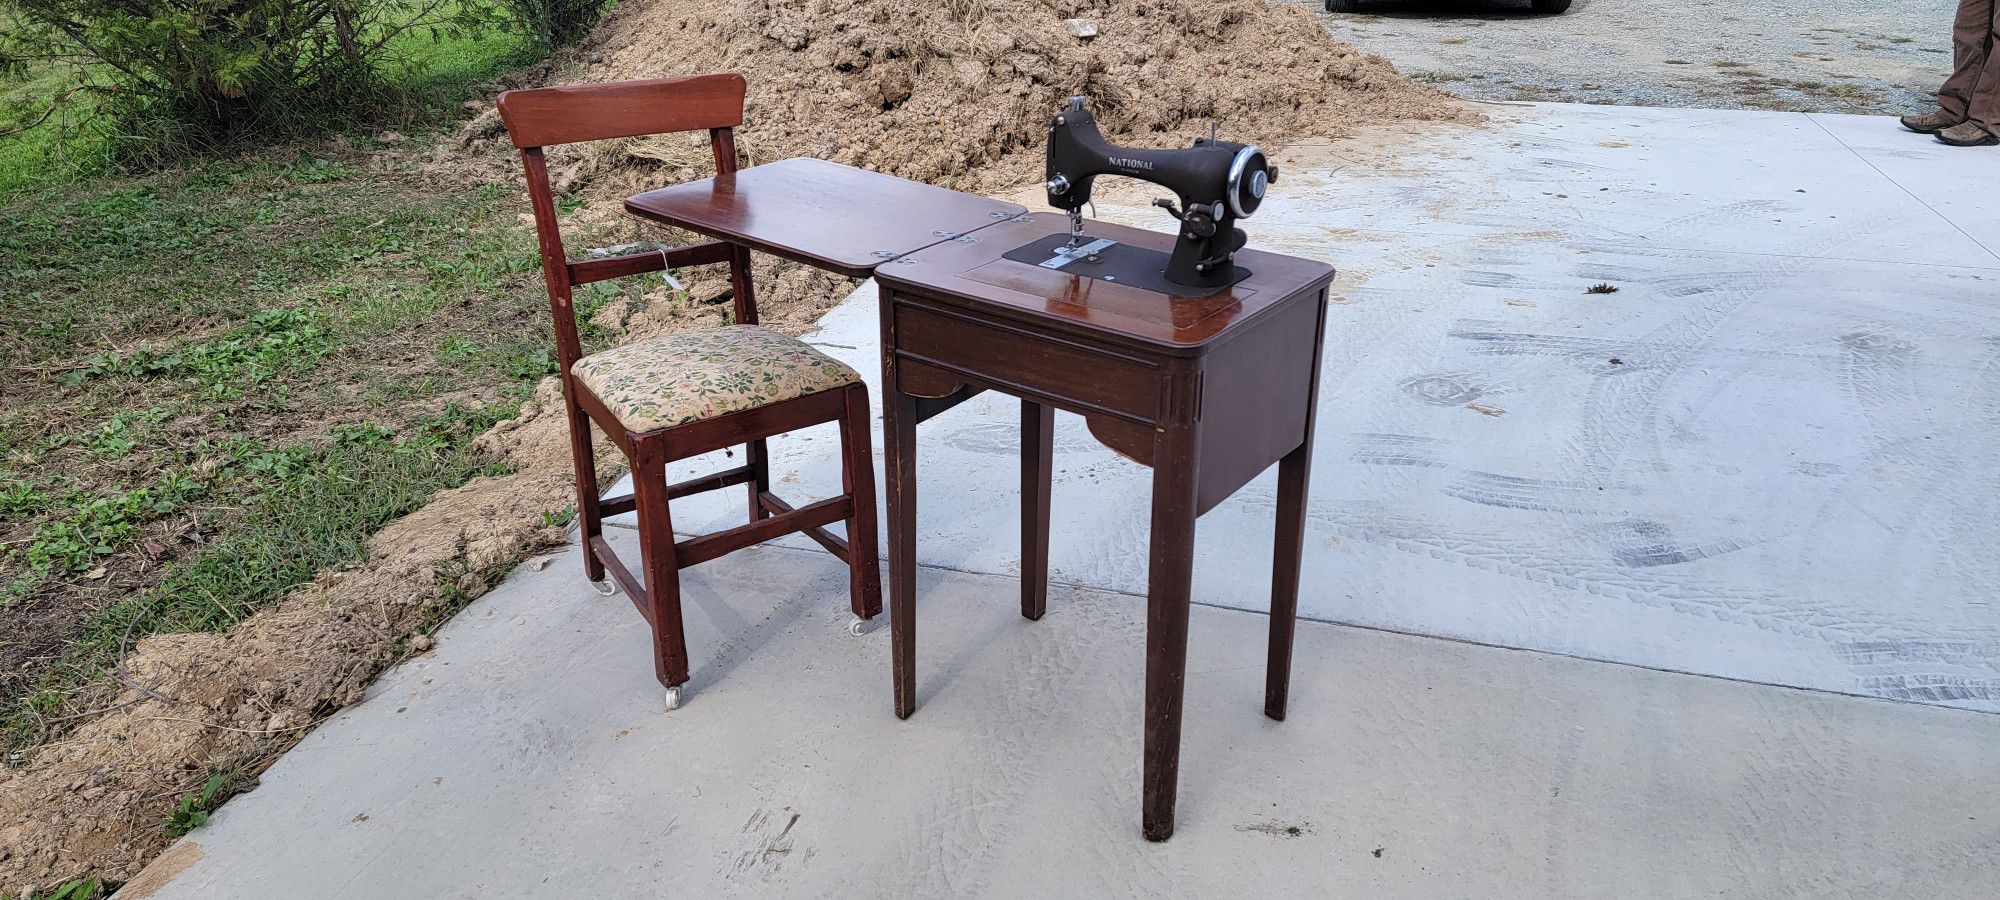 1952 National Reversew Electric Sewing Machine Table And Chair